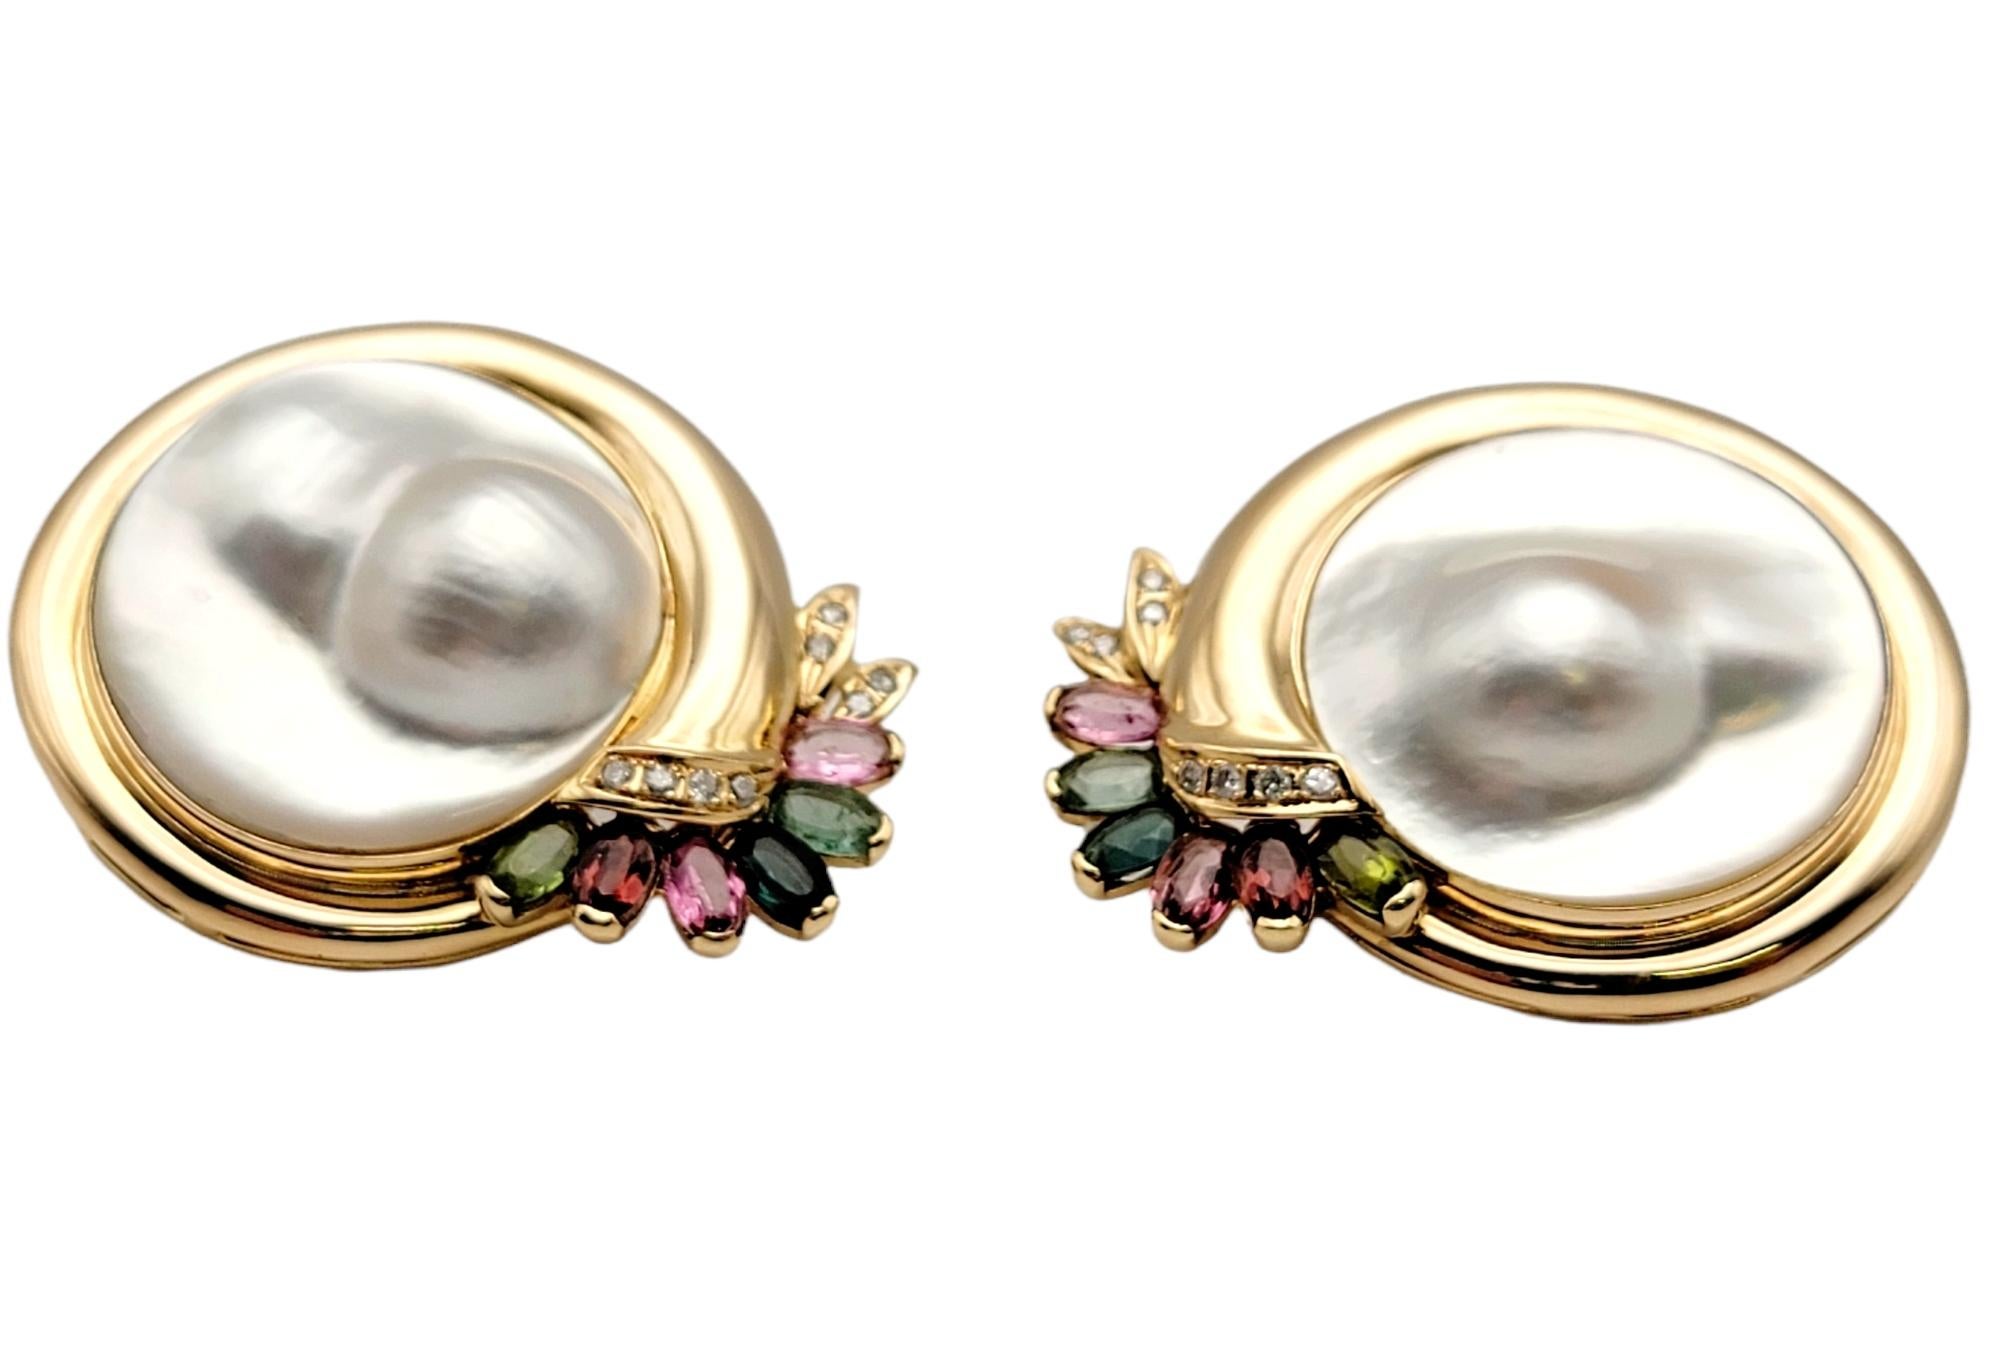 Absolutely beautiful pearl and gemstone pierced earrings fill the lobe with chic sophistication. Bold in both size and design, these elegant beauties feature stunning blistered Mabe pearl centers surrounded by polished yellow gold and accented with